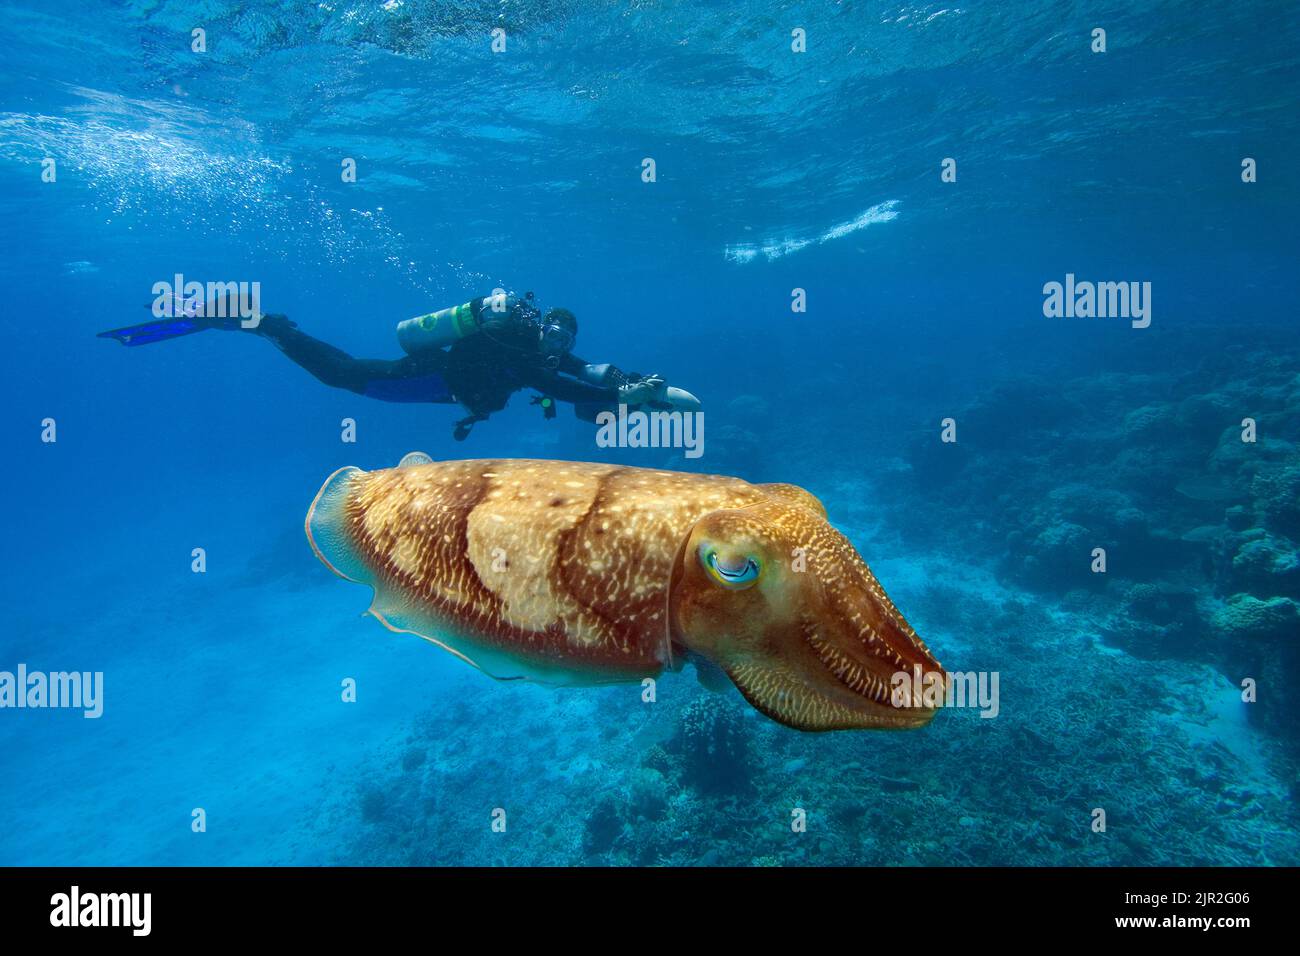 Diver (MR) on an underwater scooter and a common cuttlefish, Sepia officinalis, in Palau, Micronesia. Stock Photo